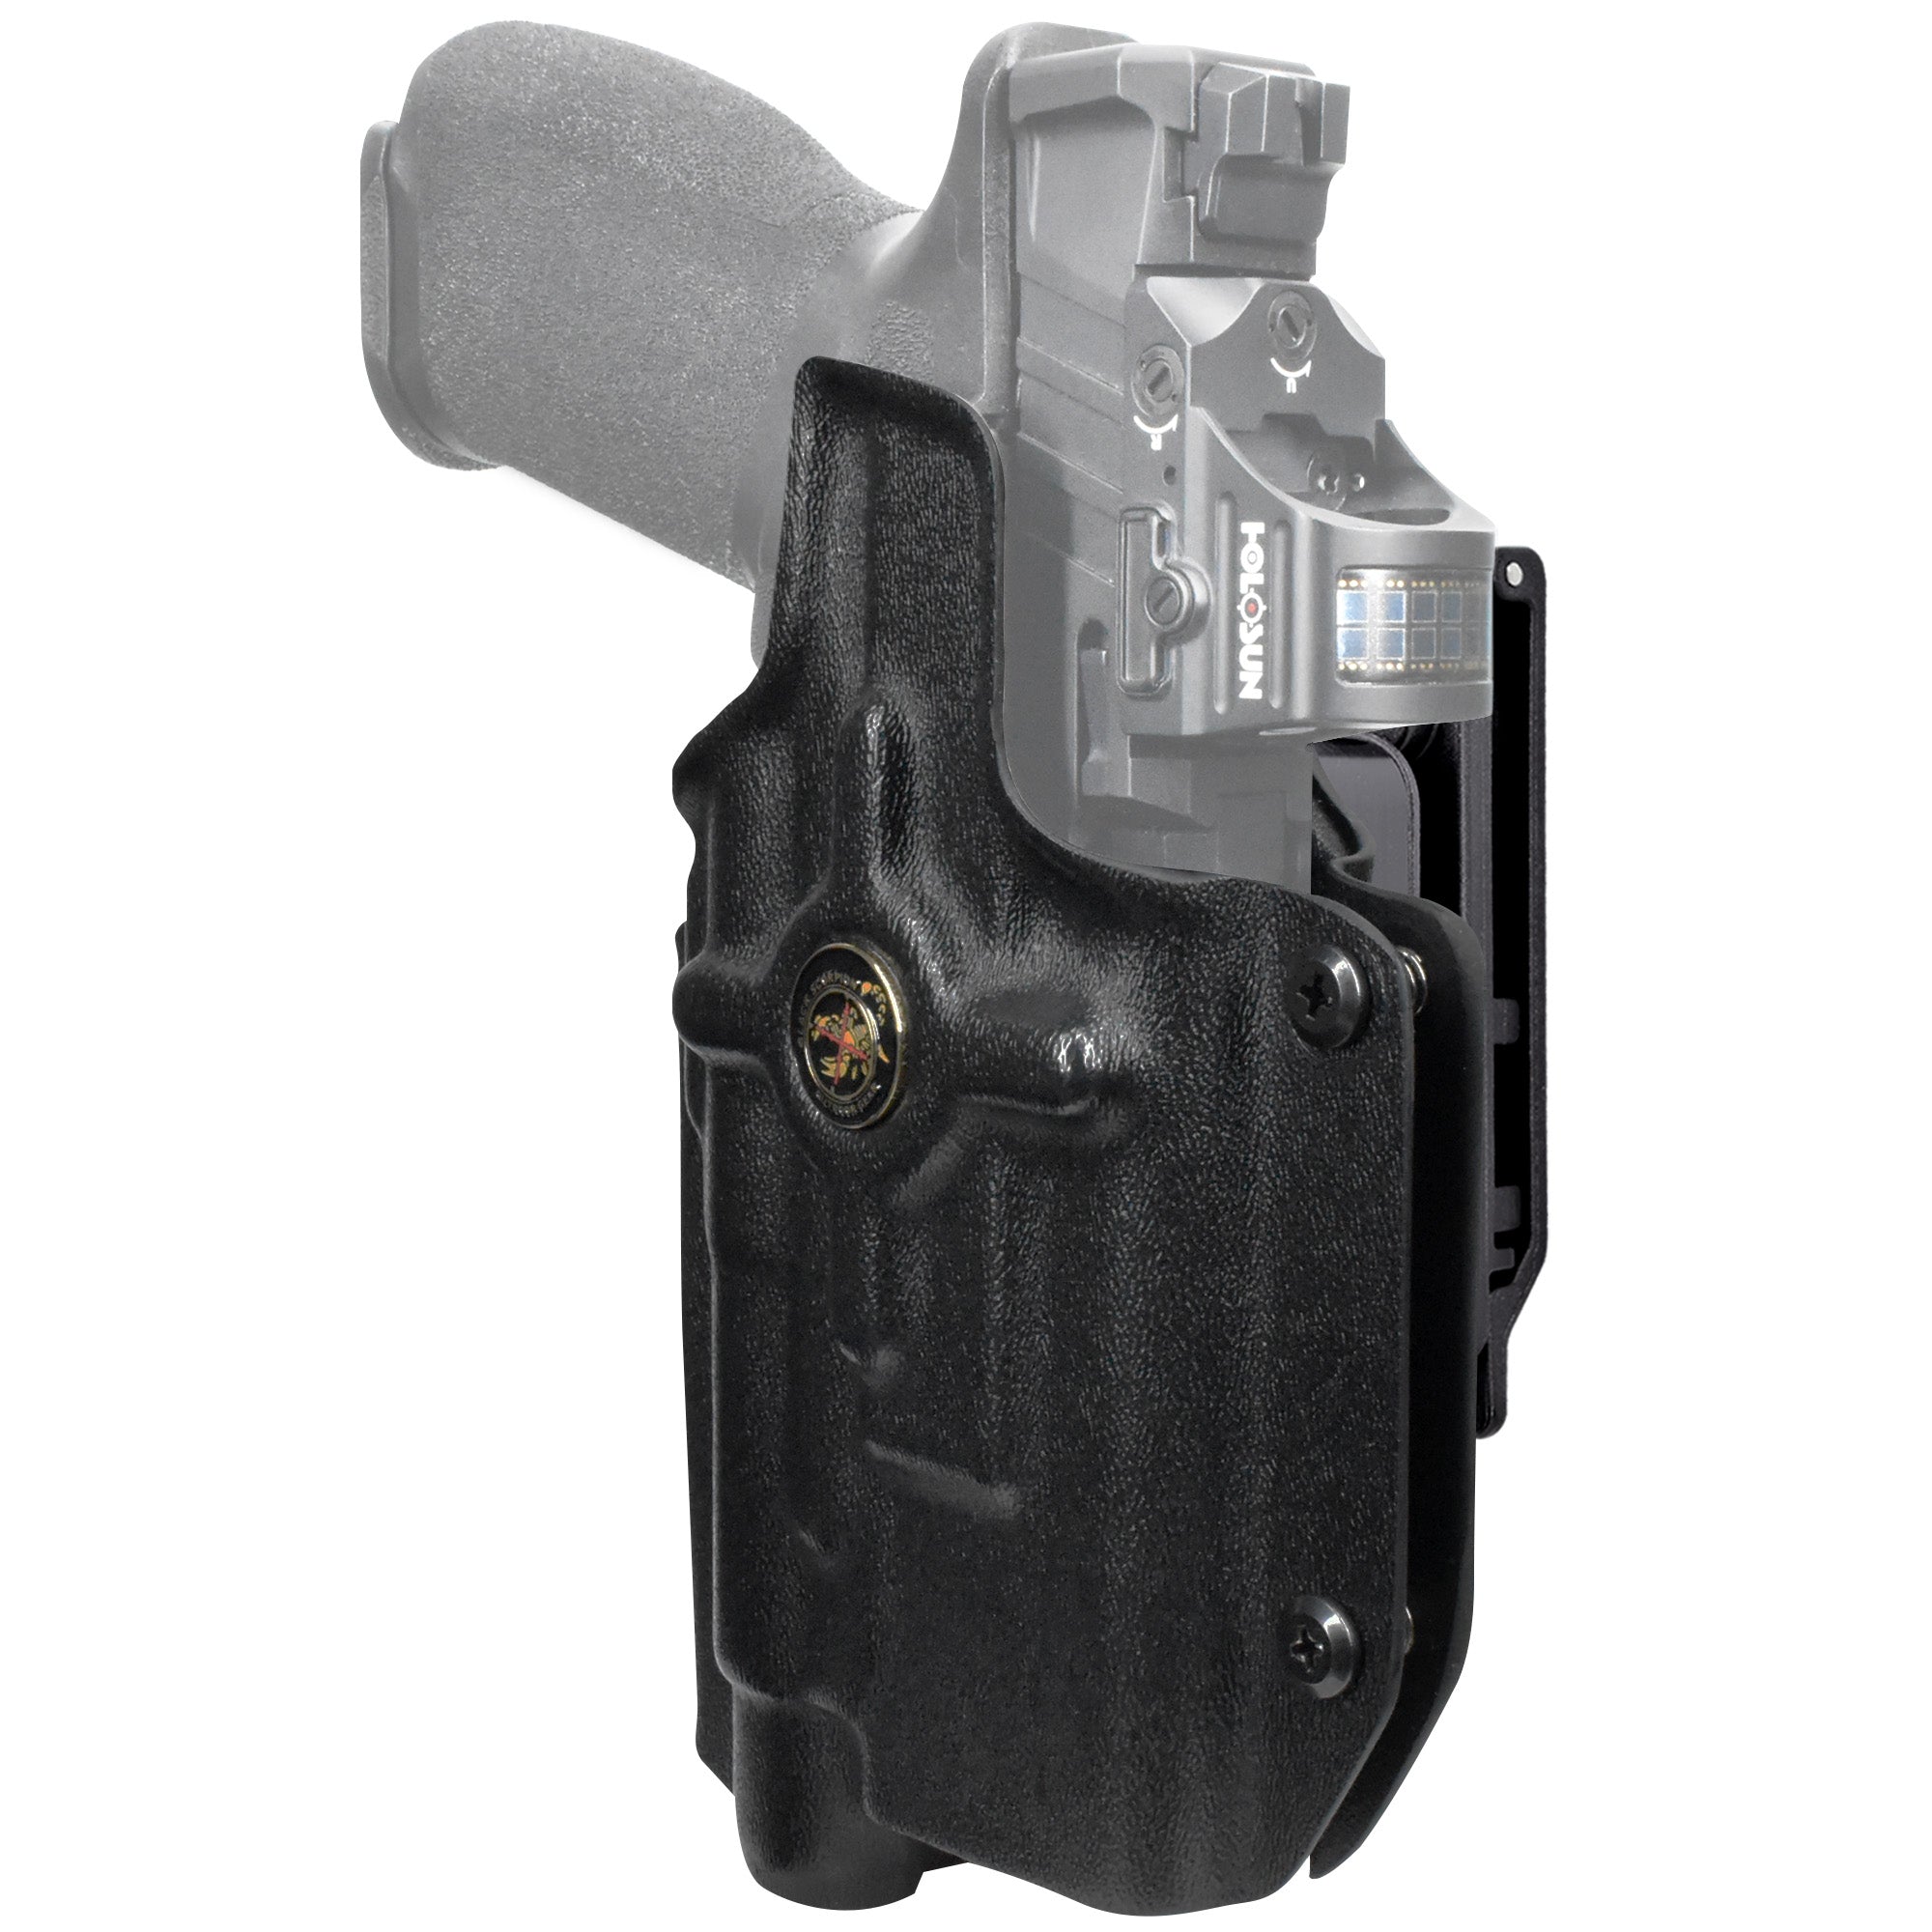 Glock 17, 22, 44, 45 w/ Streamlight TLR-1 HL Quick Release IDPA Holster